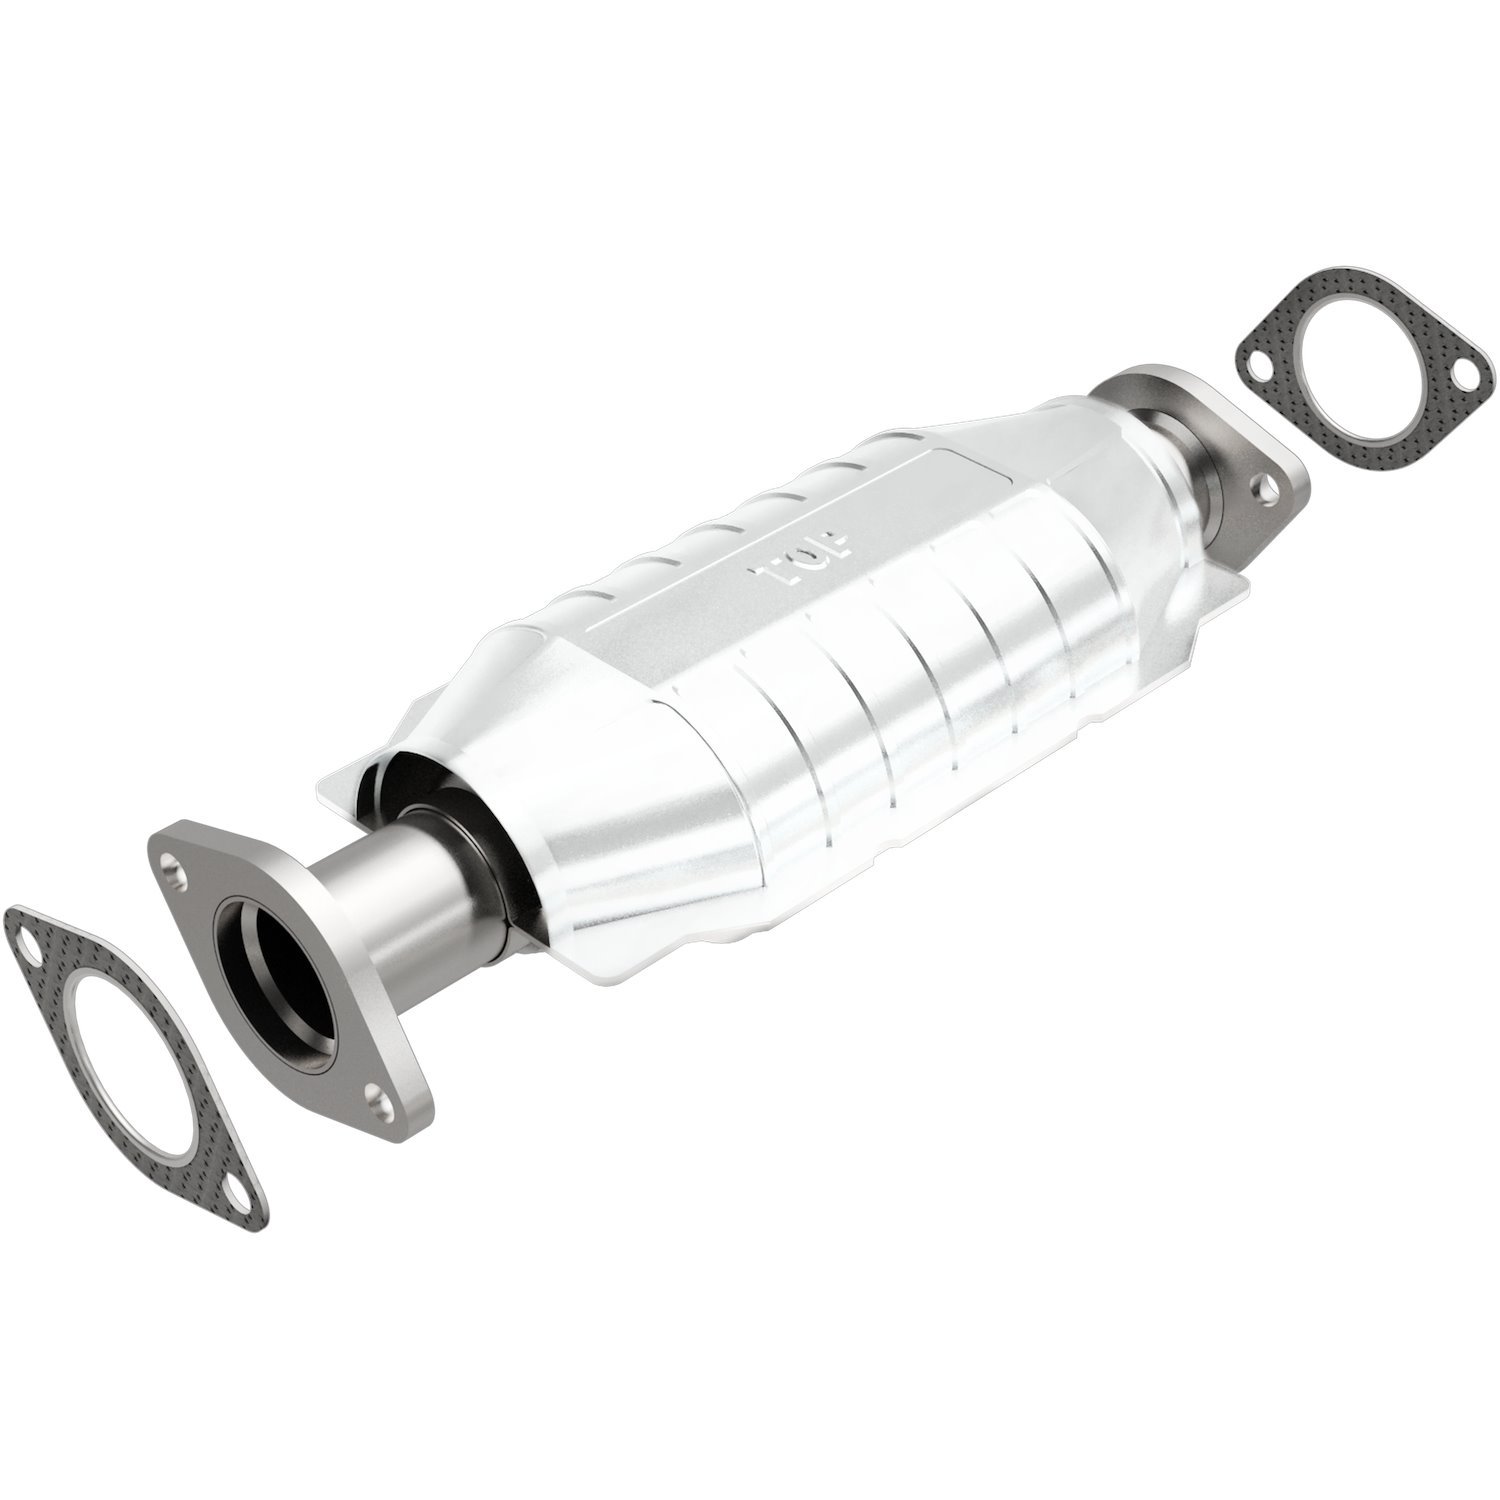 Direct-Fit Catalytic Converter 1986-94 for Nissan Maxima 3.0L